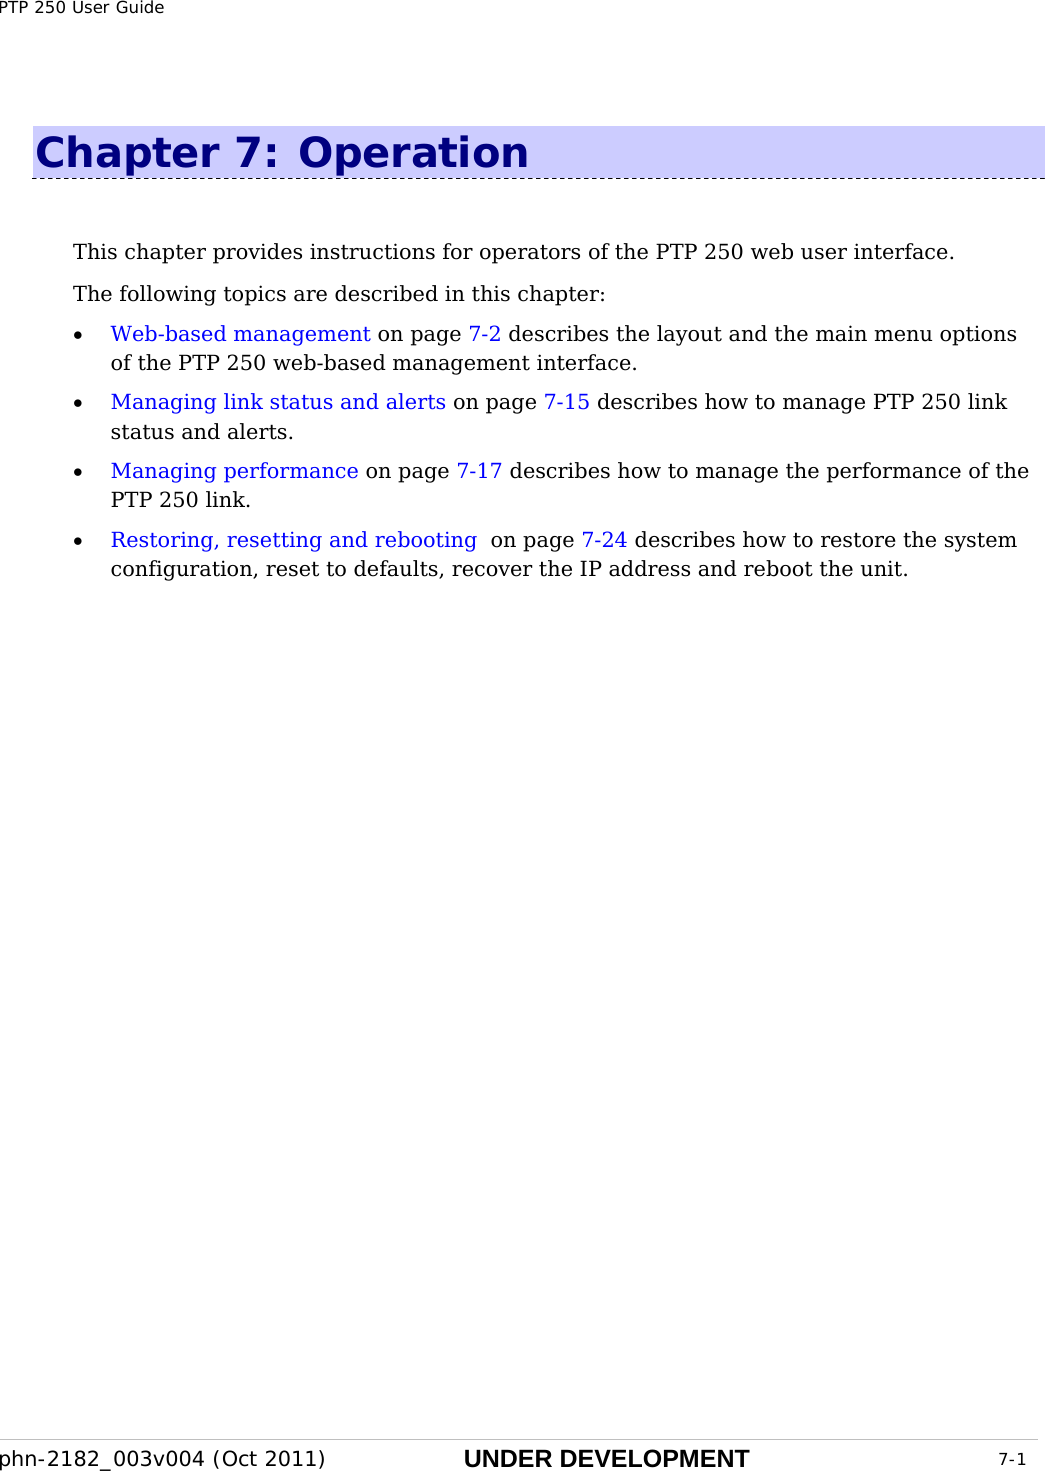 PTP 250 User Guide phn-2182_003v004 (Oct 2011)  UNDER DEVELOPMENT  7-1  Chapter 7:  Operation This chapter provides instructions for operators of the PTP 250 web user interface.   The following topics are described in this chapter: • Web-based management on page 7-2 describes the layout and the main menu options of the PTP 250 web-based management interface. • Managing link status and alerts on page 7-15 describes how to manage PTP 250 link status and alerts. • Managing performance on page 7-17 describes how to manage the performance of the PTP 250 link. • Restoring, resetting and rebooting  on page 7-24 describes how to restore the system configuration, reset to defaults, recover the IP address and reboot the unit.  